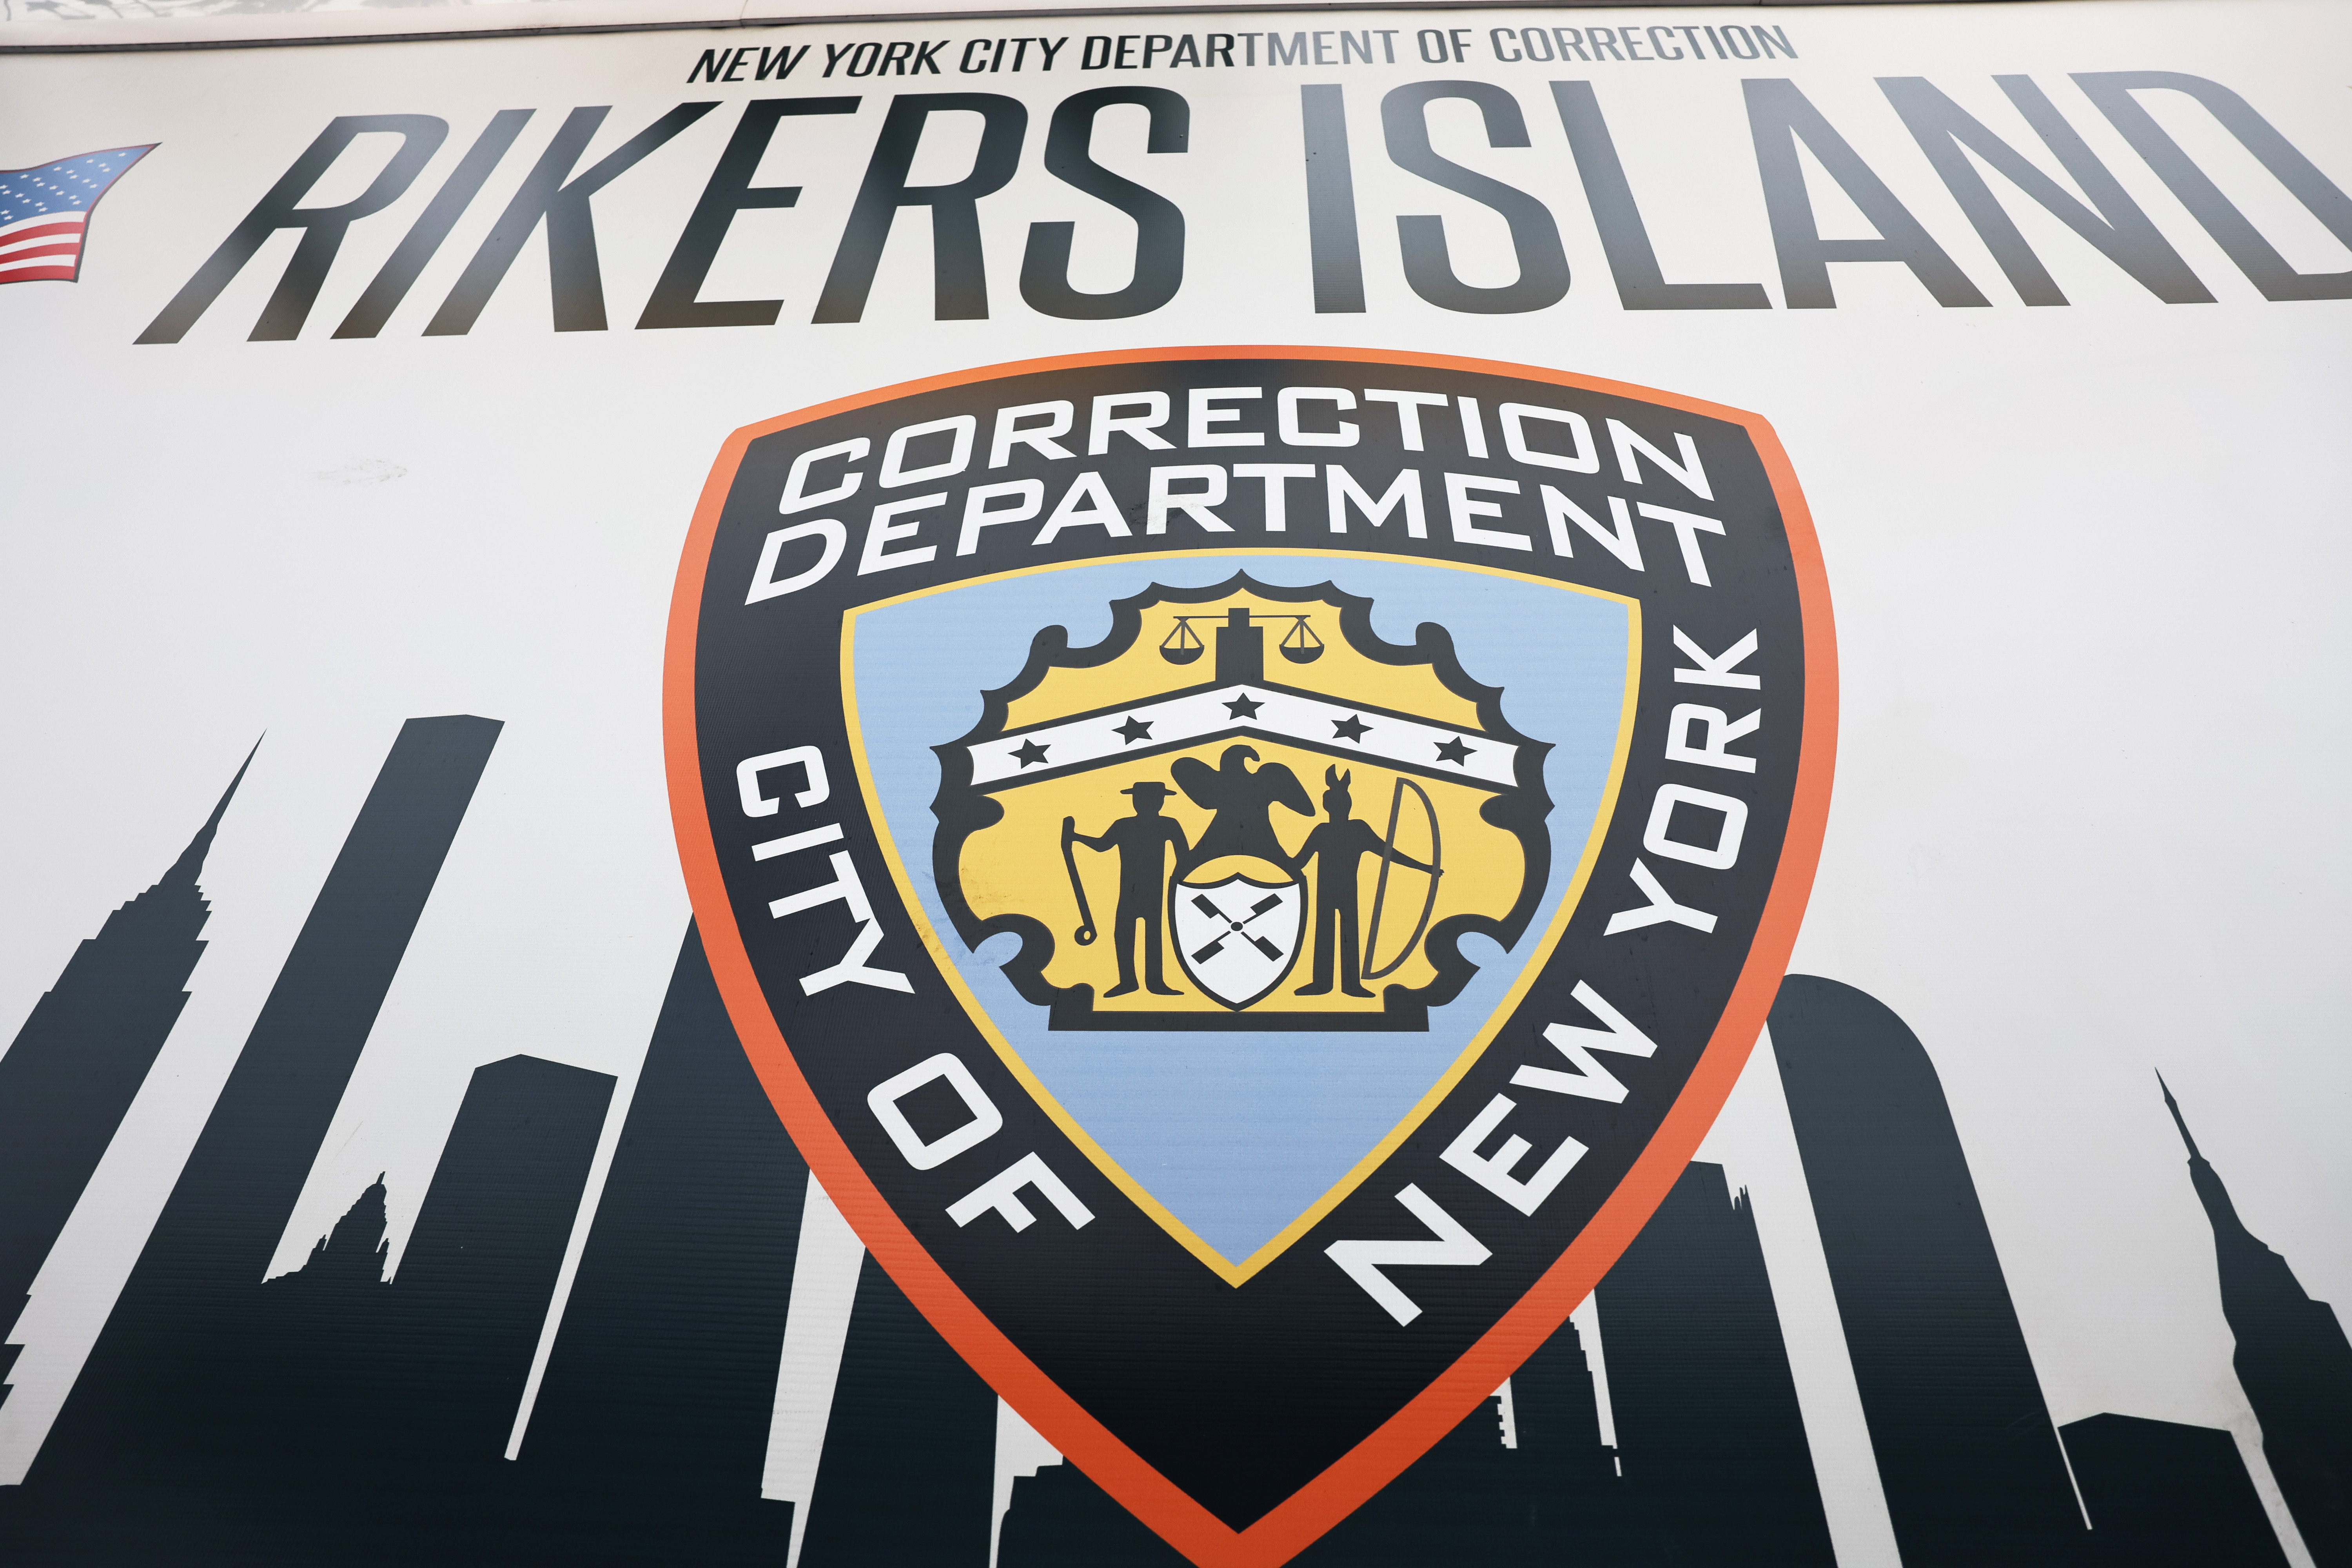 The Rikers Island jail sign is seen on October 24, 2022 in New York City.